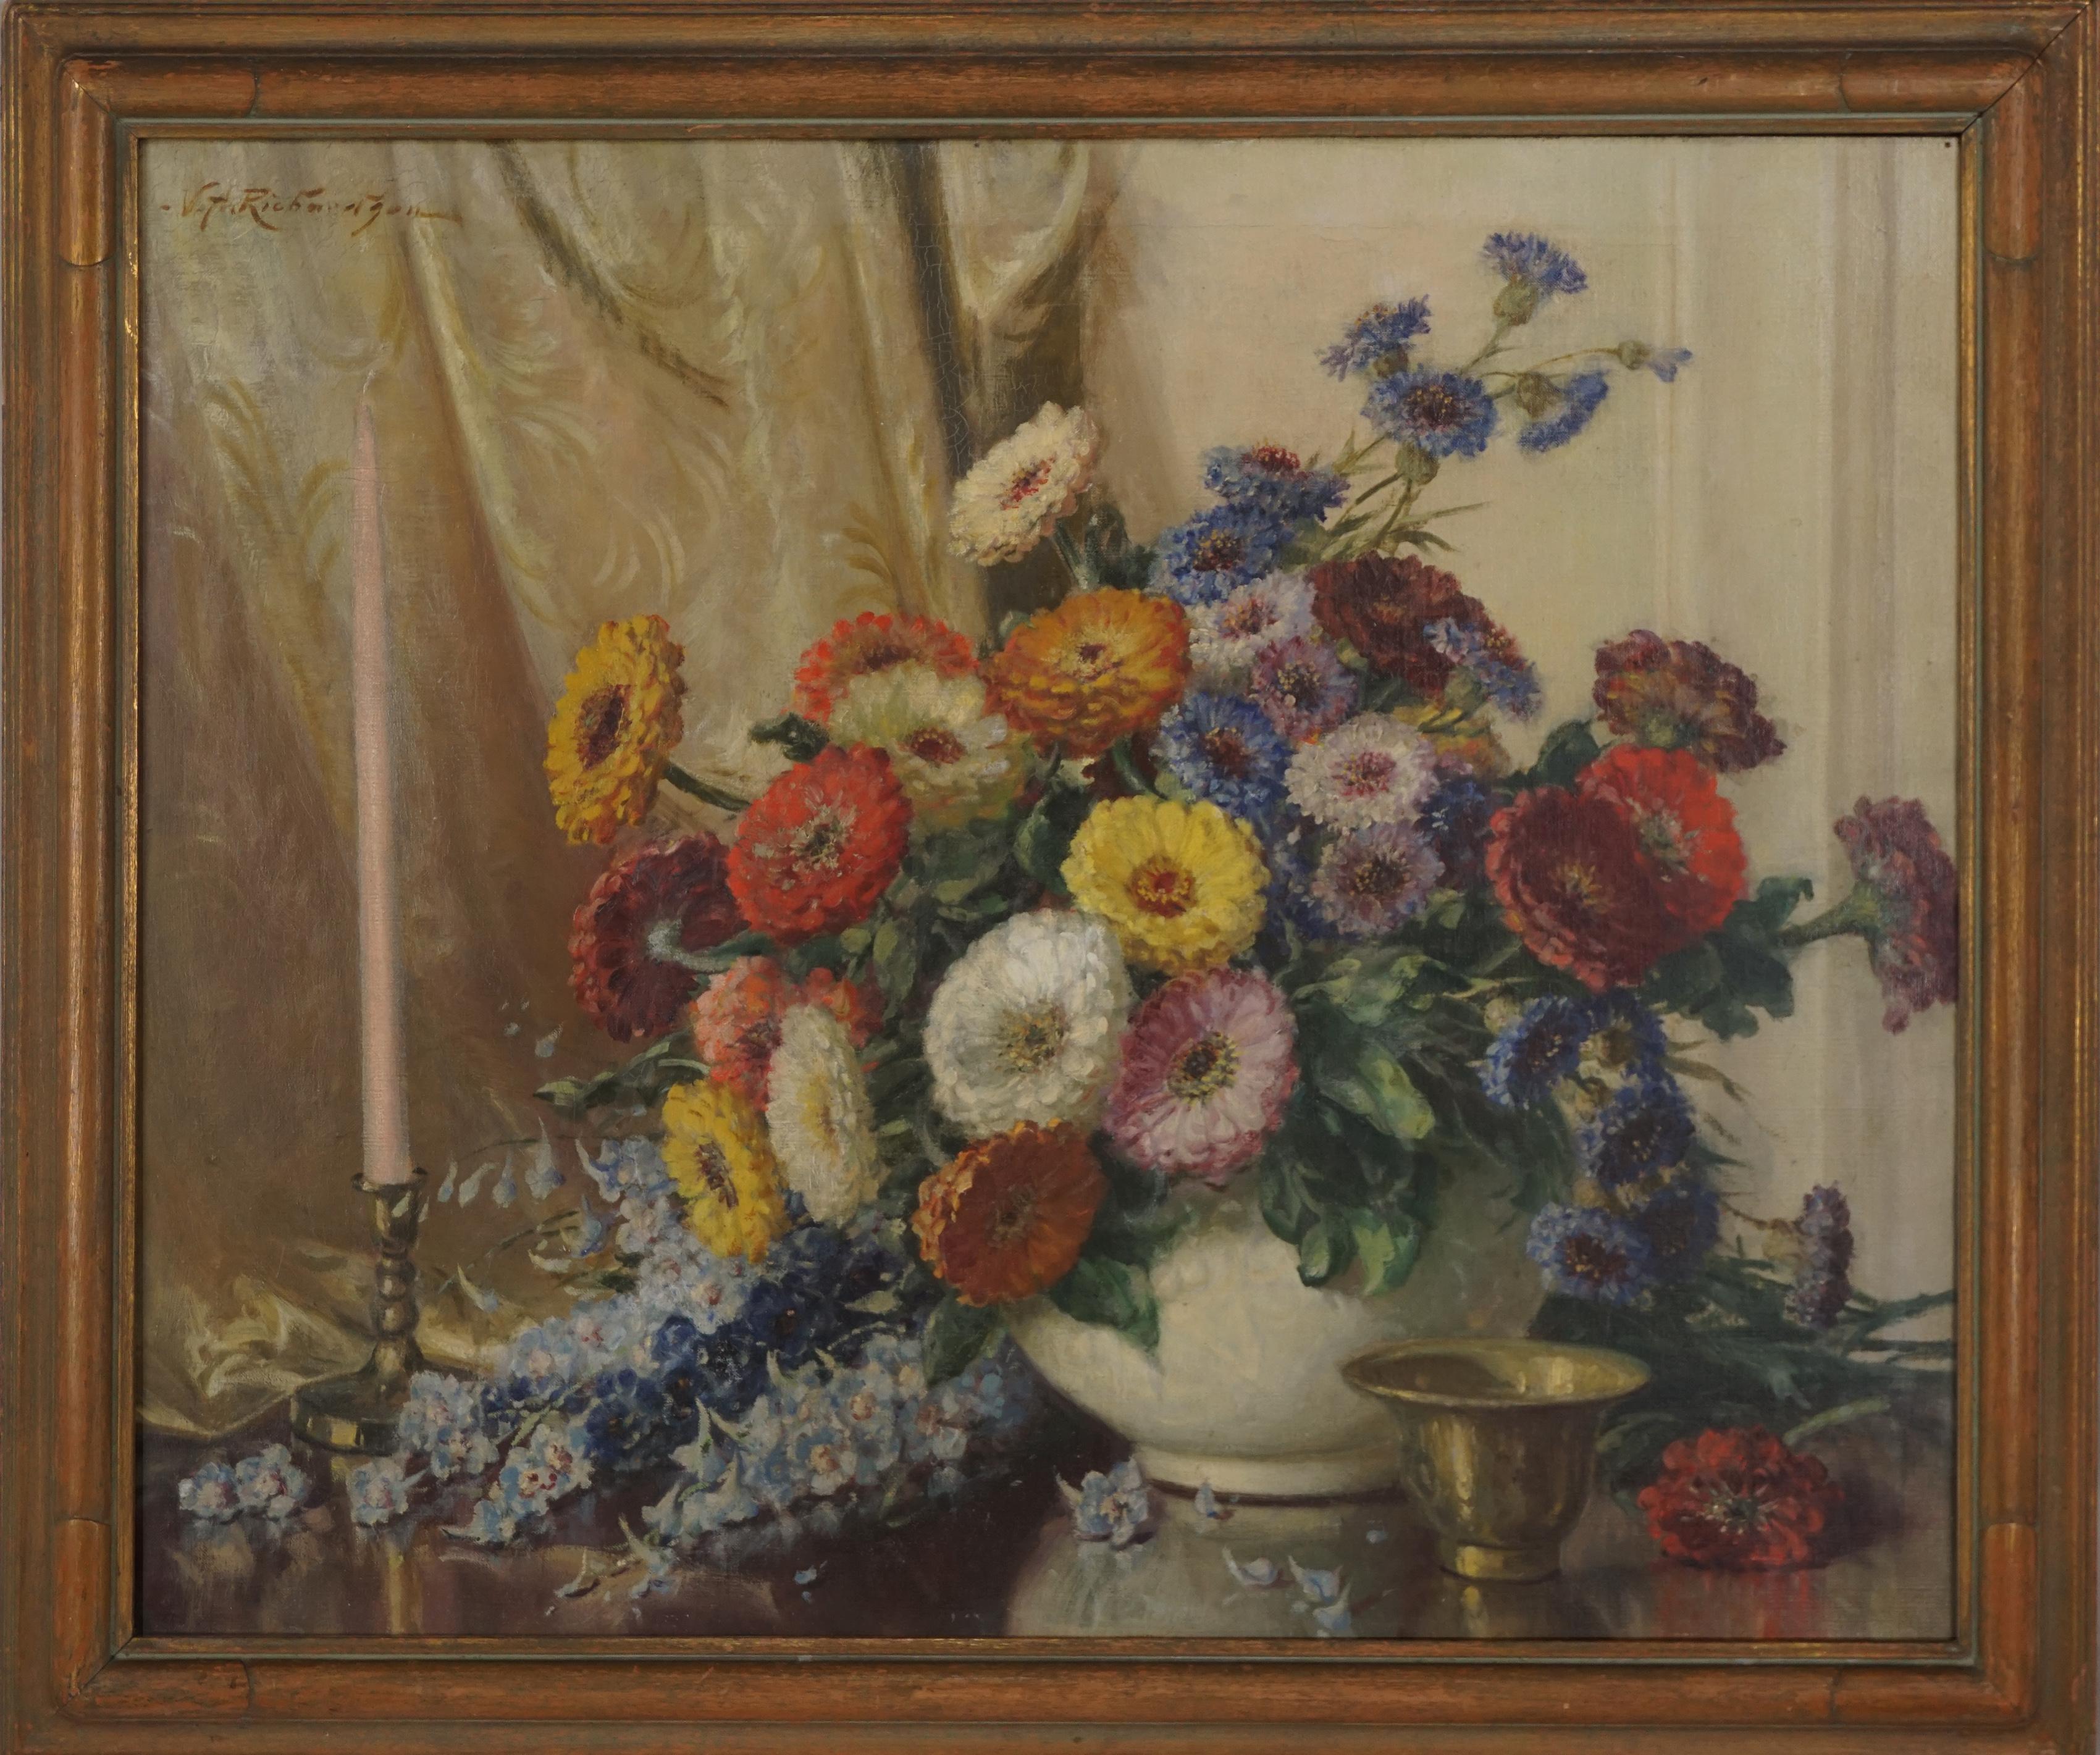 Early 20th Century Summer Floral Still Life - Zinnias, Delphiniums, Corn Flowers - Painting by Volney Richardson